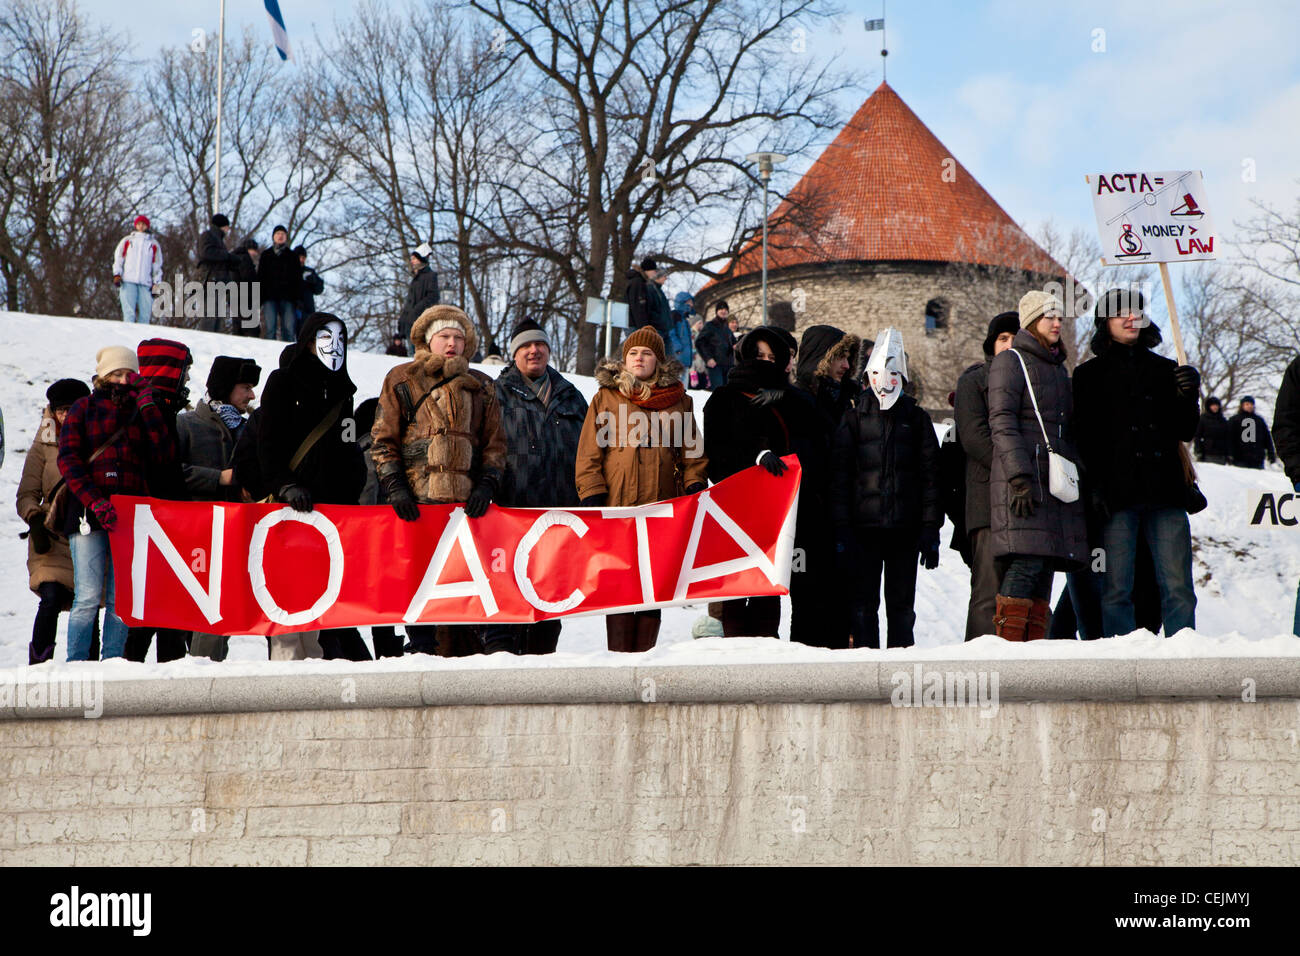 People gathered at the protest against the Anti-Counterfeiting Trade Agreement holding 'No ACTA' signs in Tallinn, Estonia Stock Photo